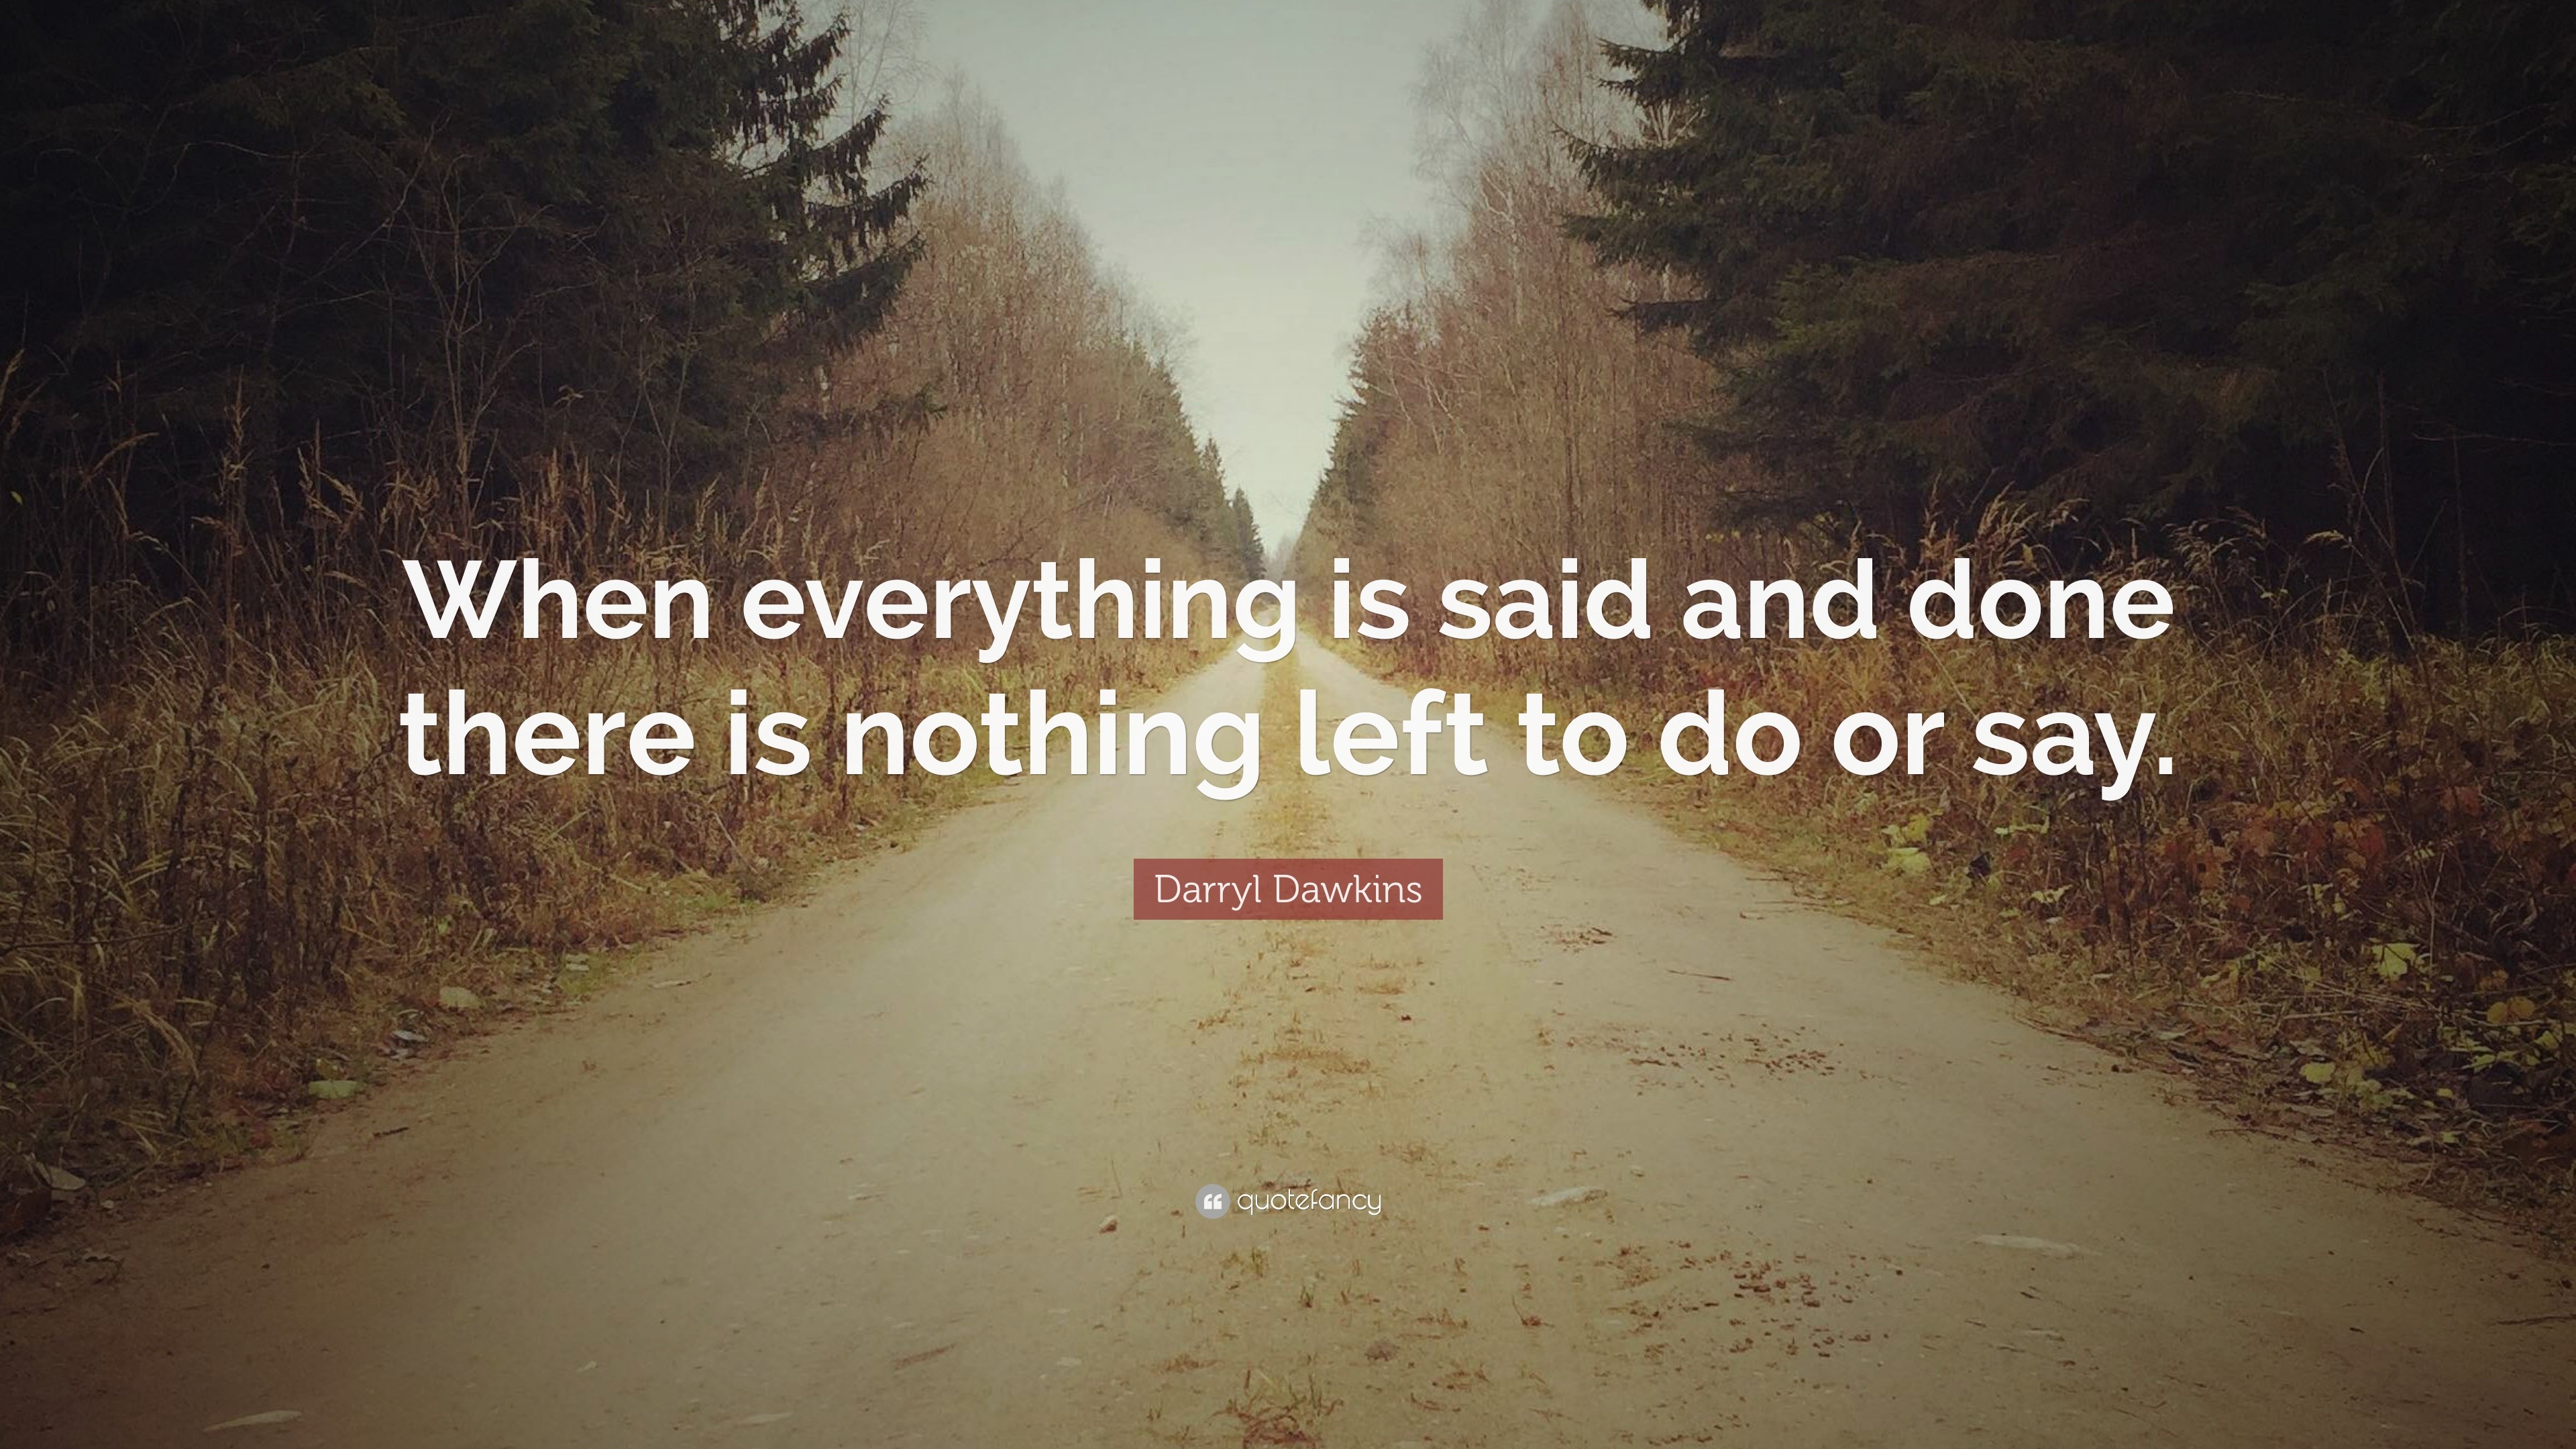 Darryl Dawkins Quote: “When Everything Is Said And Done There Is Nothing Left To Do Or